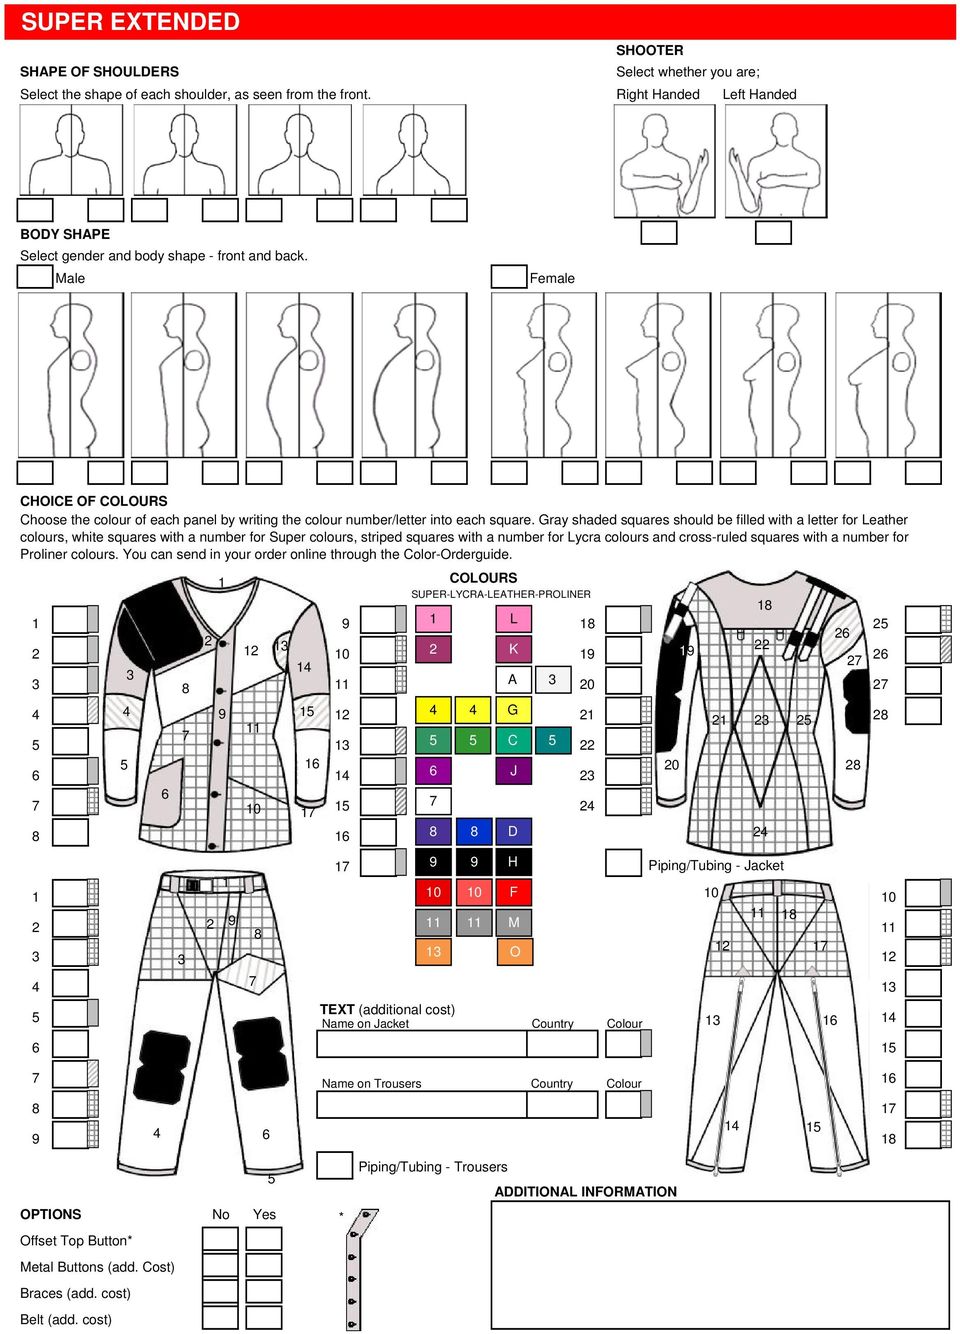 Gray shaded squares should be filled with a letter for Leather colours, white squares with a number for Super colours, striped squares with a number for Lycra colours and cross-ruled squares with a